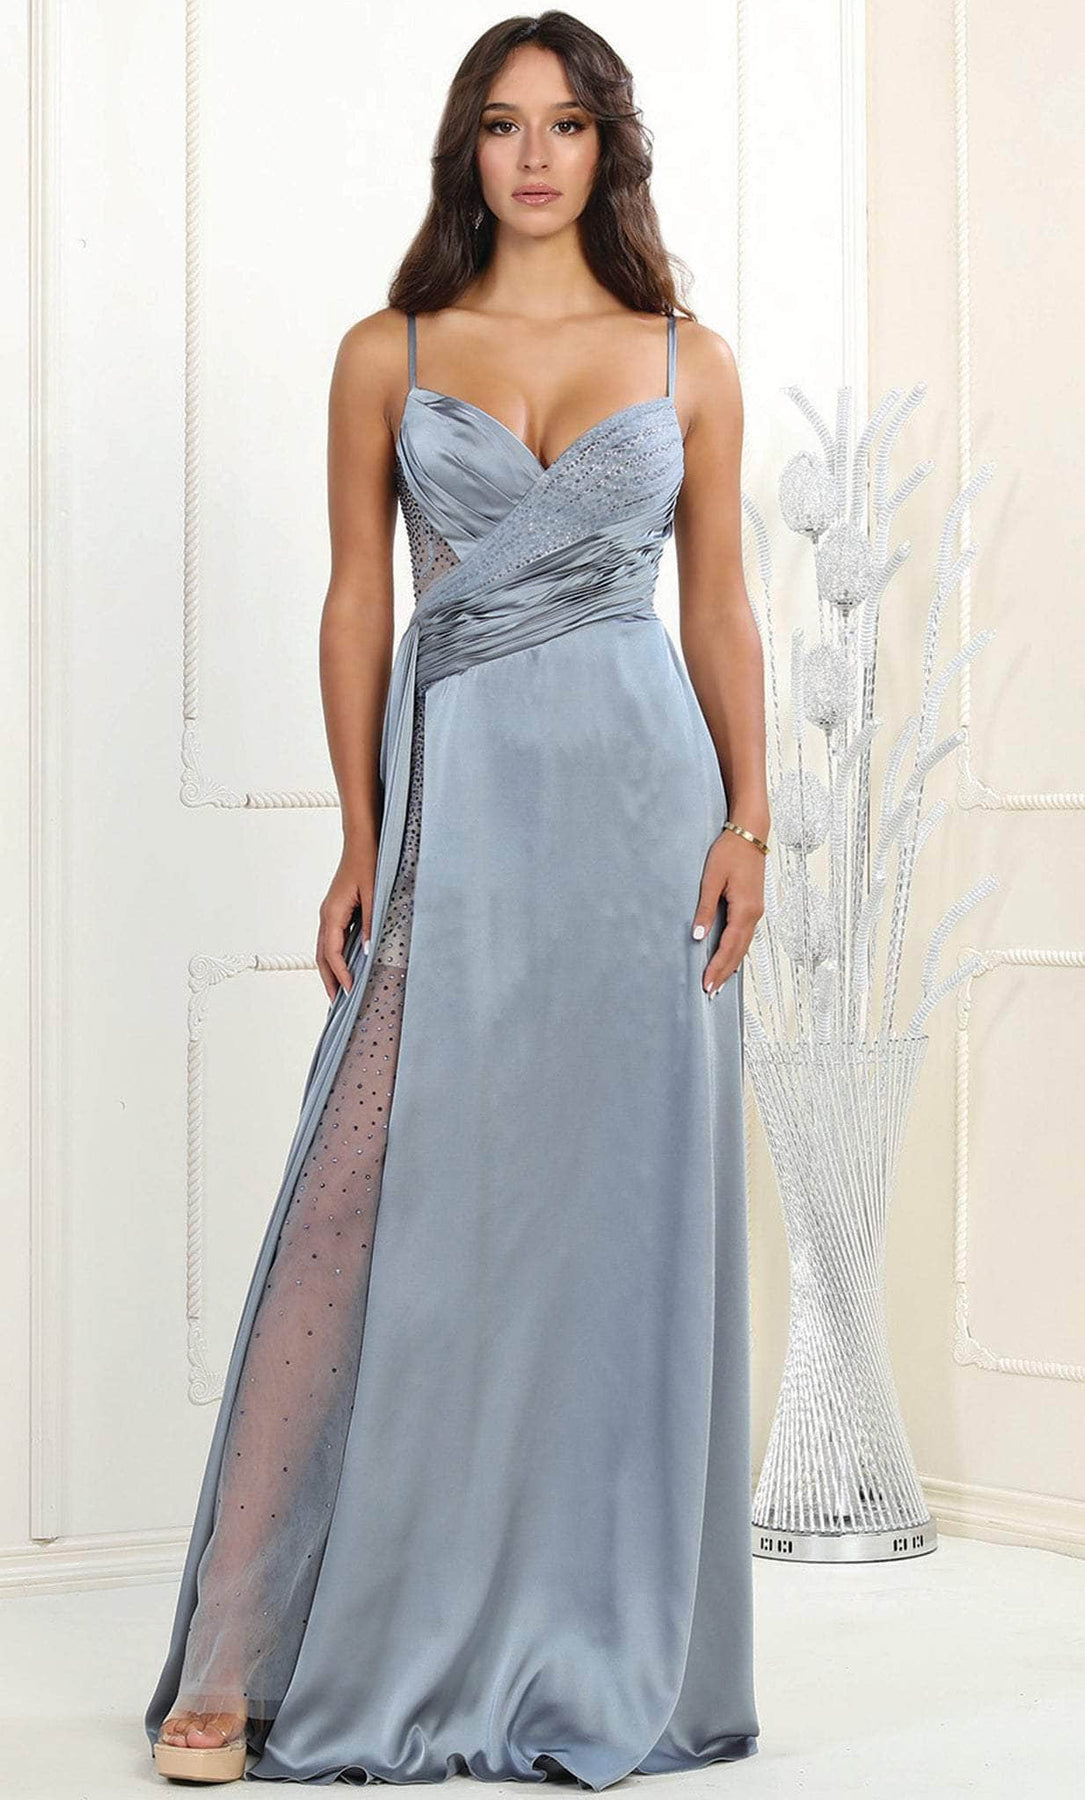 Royal Queen collection embellished gown dress size 12-14